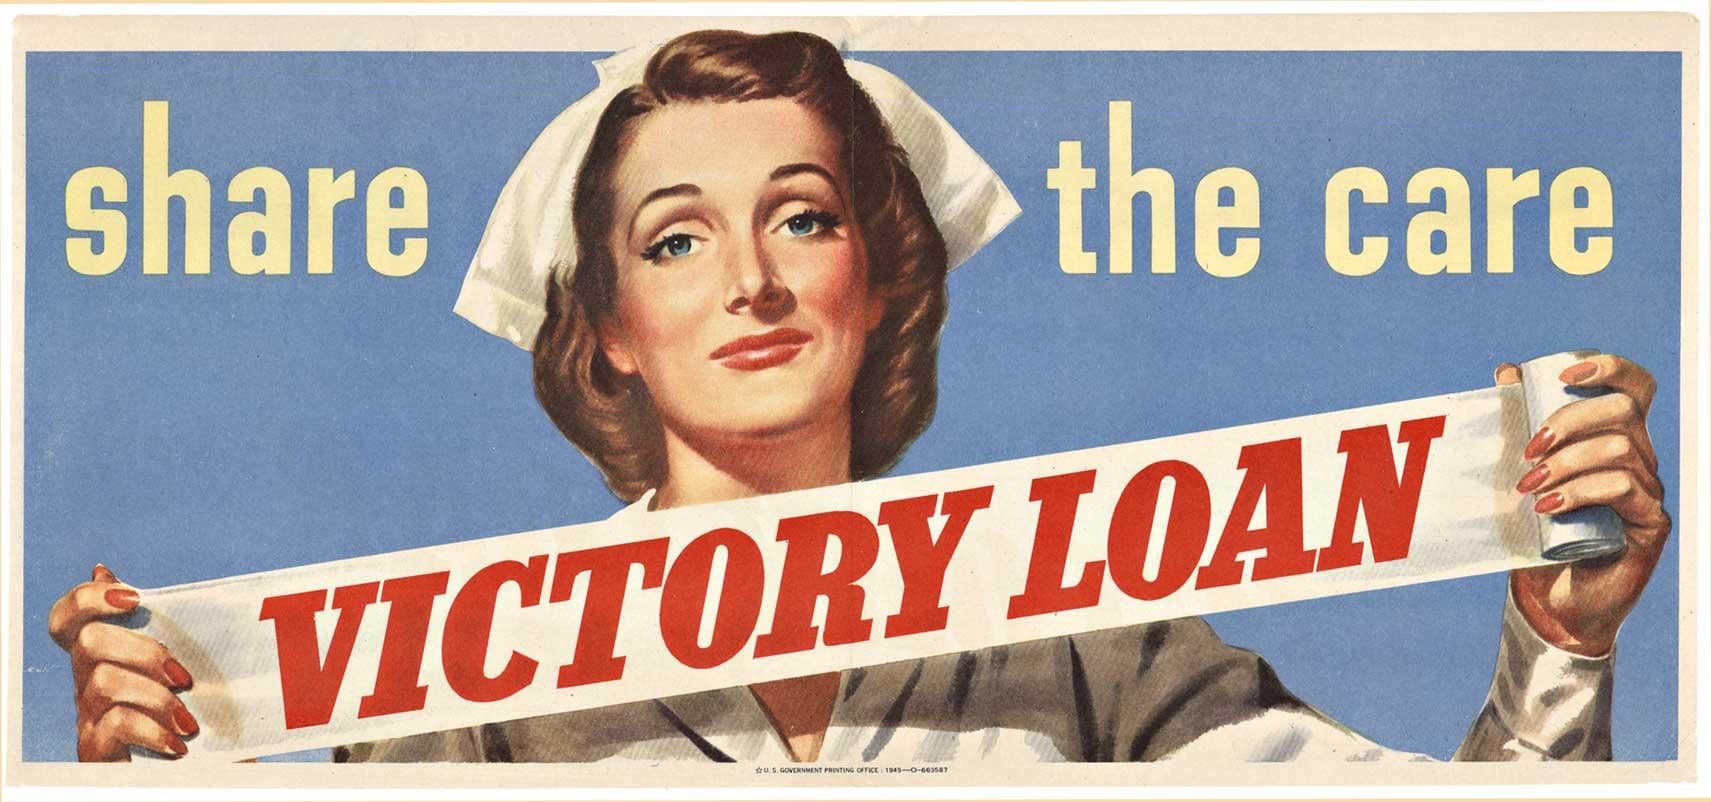 Unknown Portrait Print - Original 1945 "Share the Care, Victory Loan" vintage poster